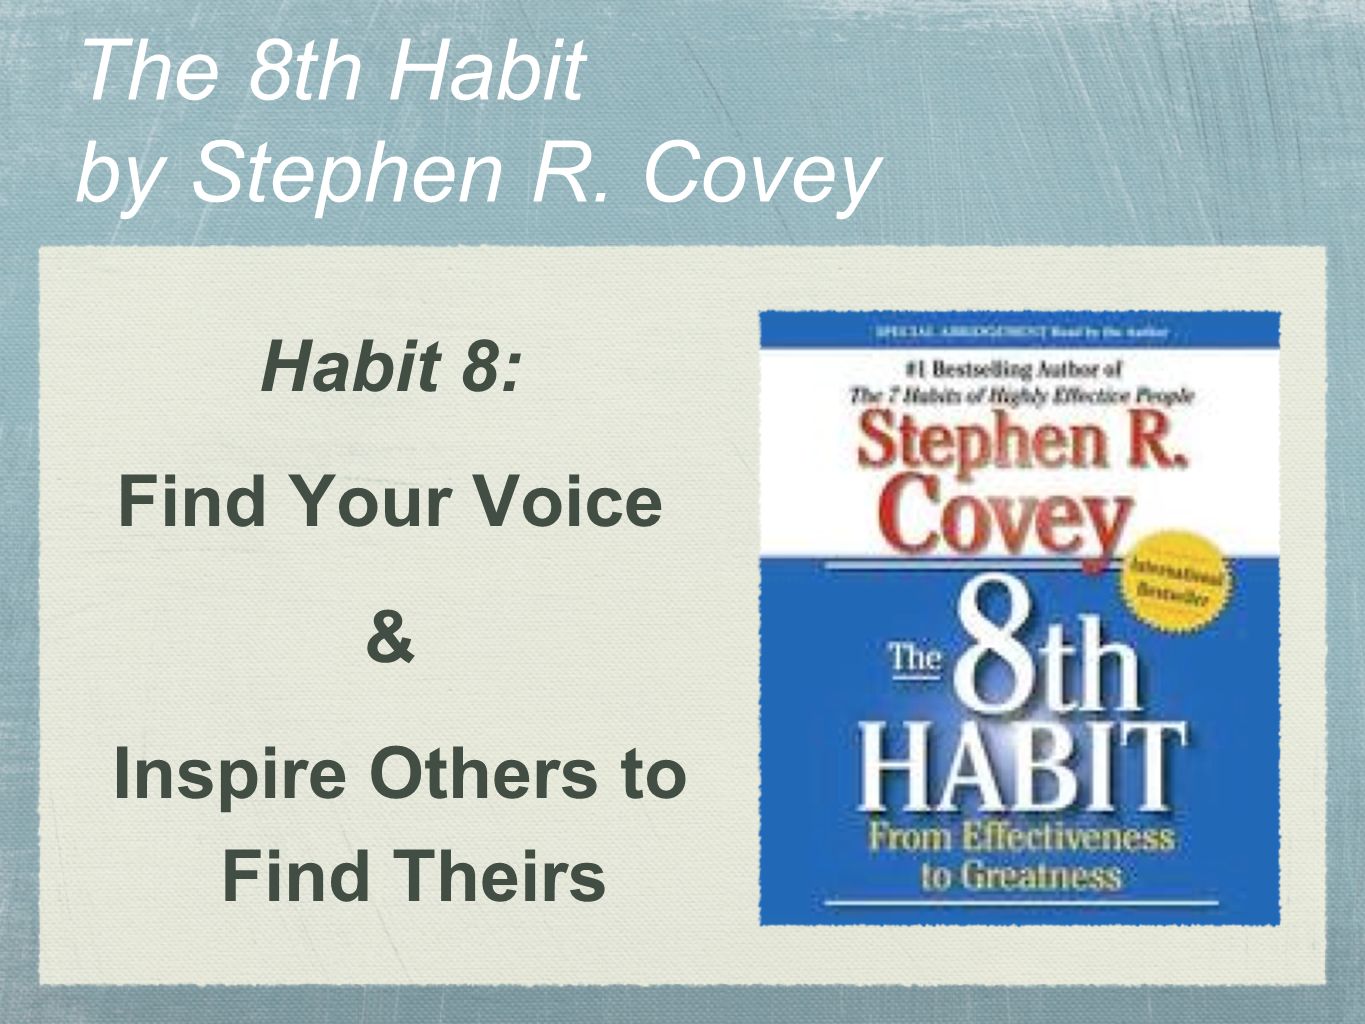 The 8th Habit From Effectiveness to Greatness